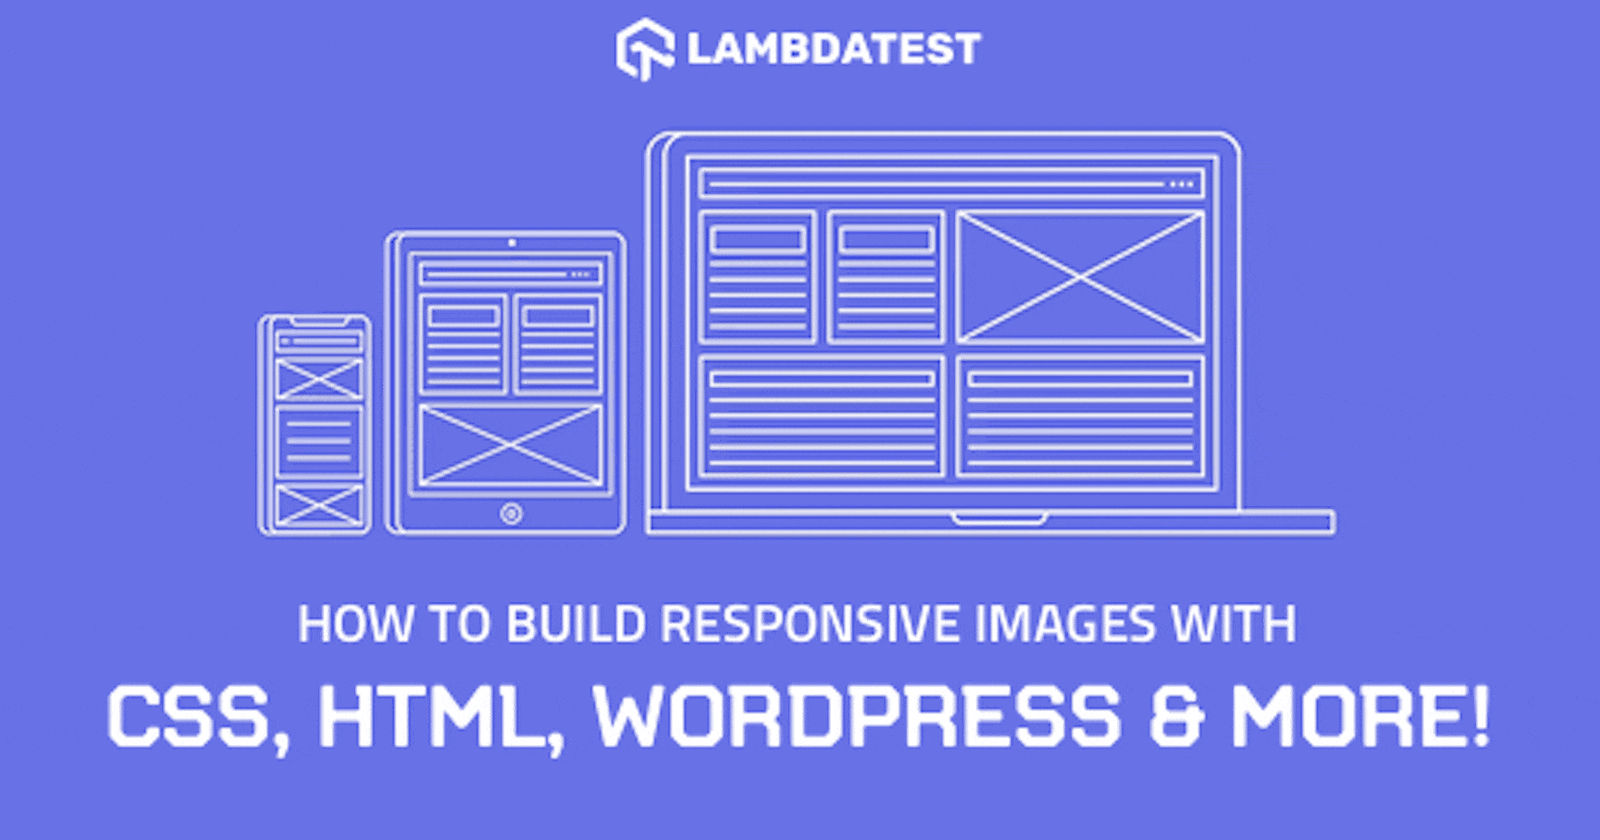 How To Make Responsive Images With CSS, HTML, WordPress & More!